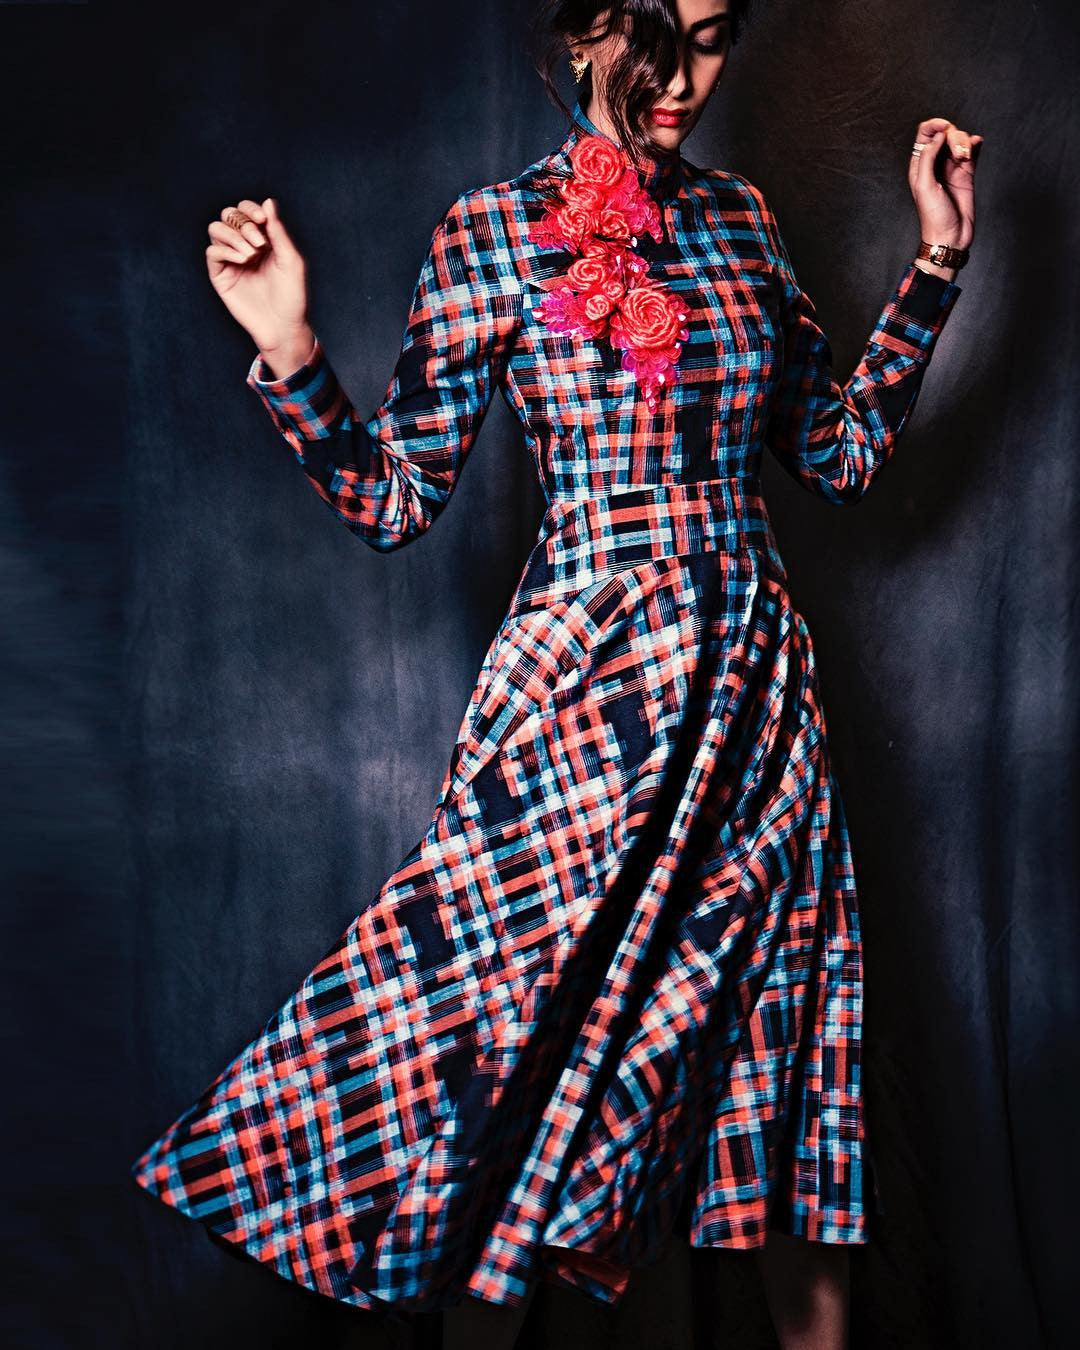 Sonam Kapoor picked out a beautiful red, blue and black checked midi from Delpozo‘s Pre-Fall 2017 